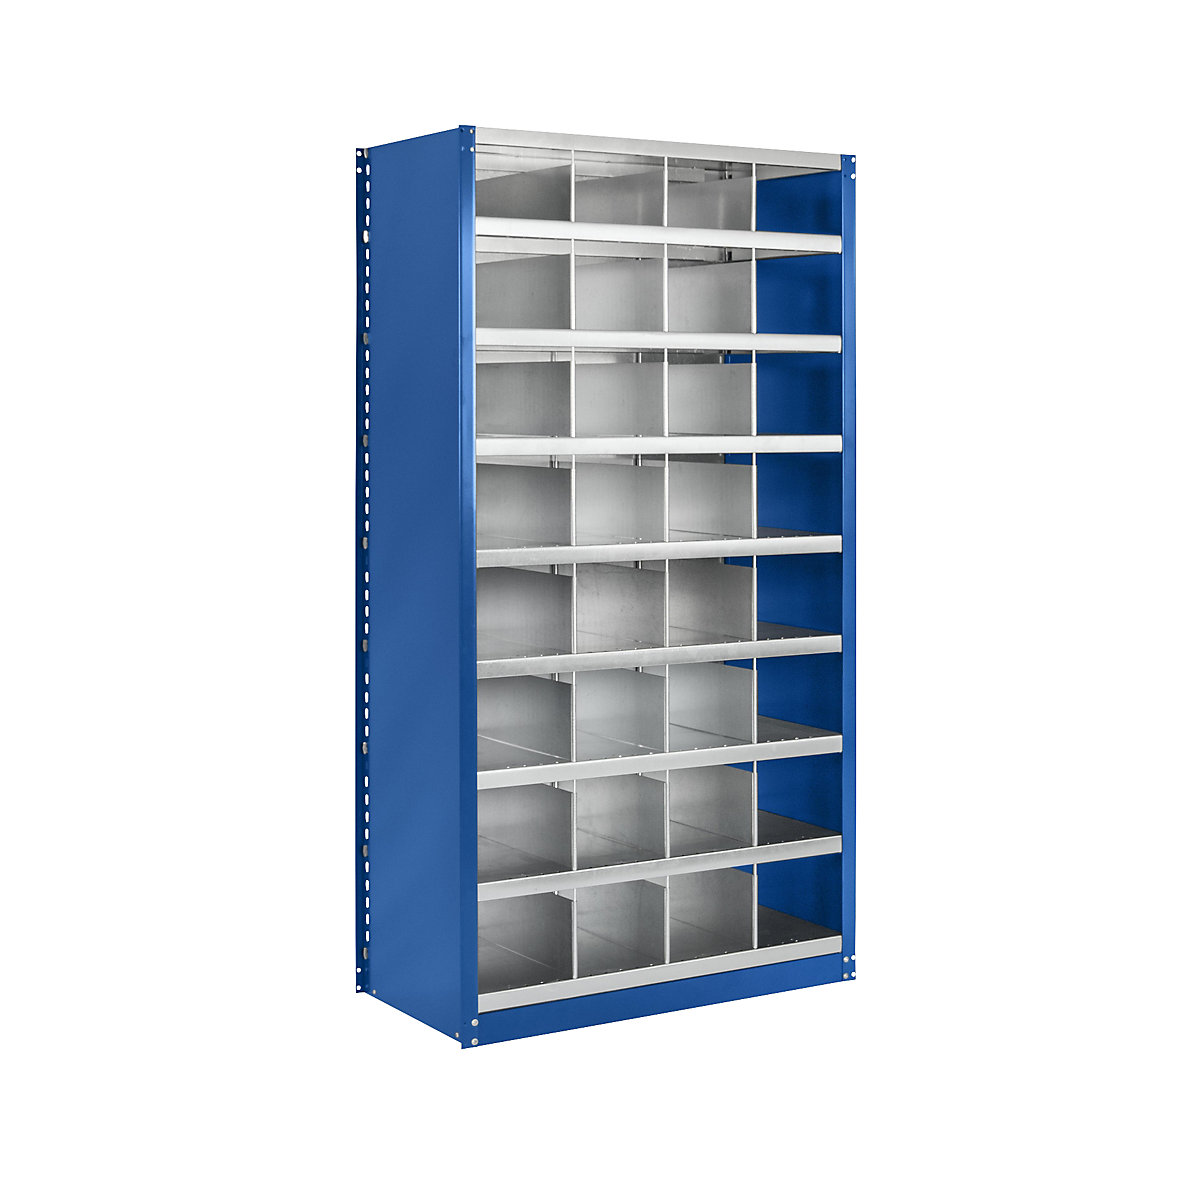 Rayonnage emboîtable modulaire, hauteur 1990 mm – eurokraft pro, 32 casiers, l x p 1000 x 500 mm, rayonnage additionnel, bleu gentiane RAL 5010-1